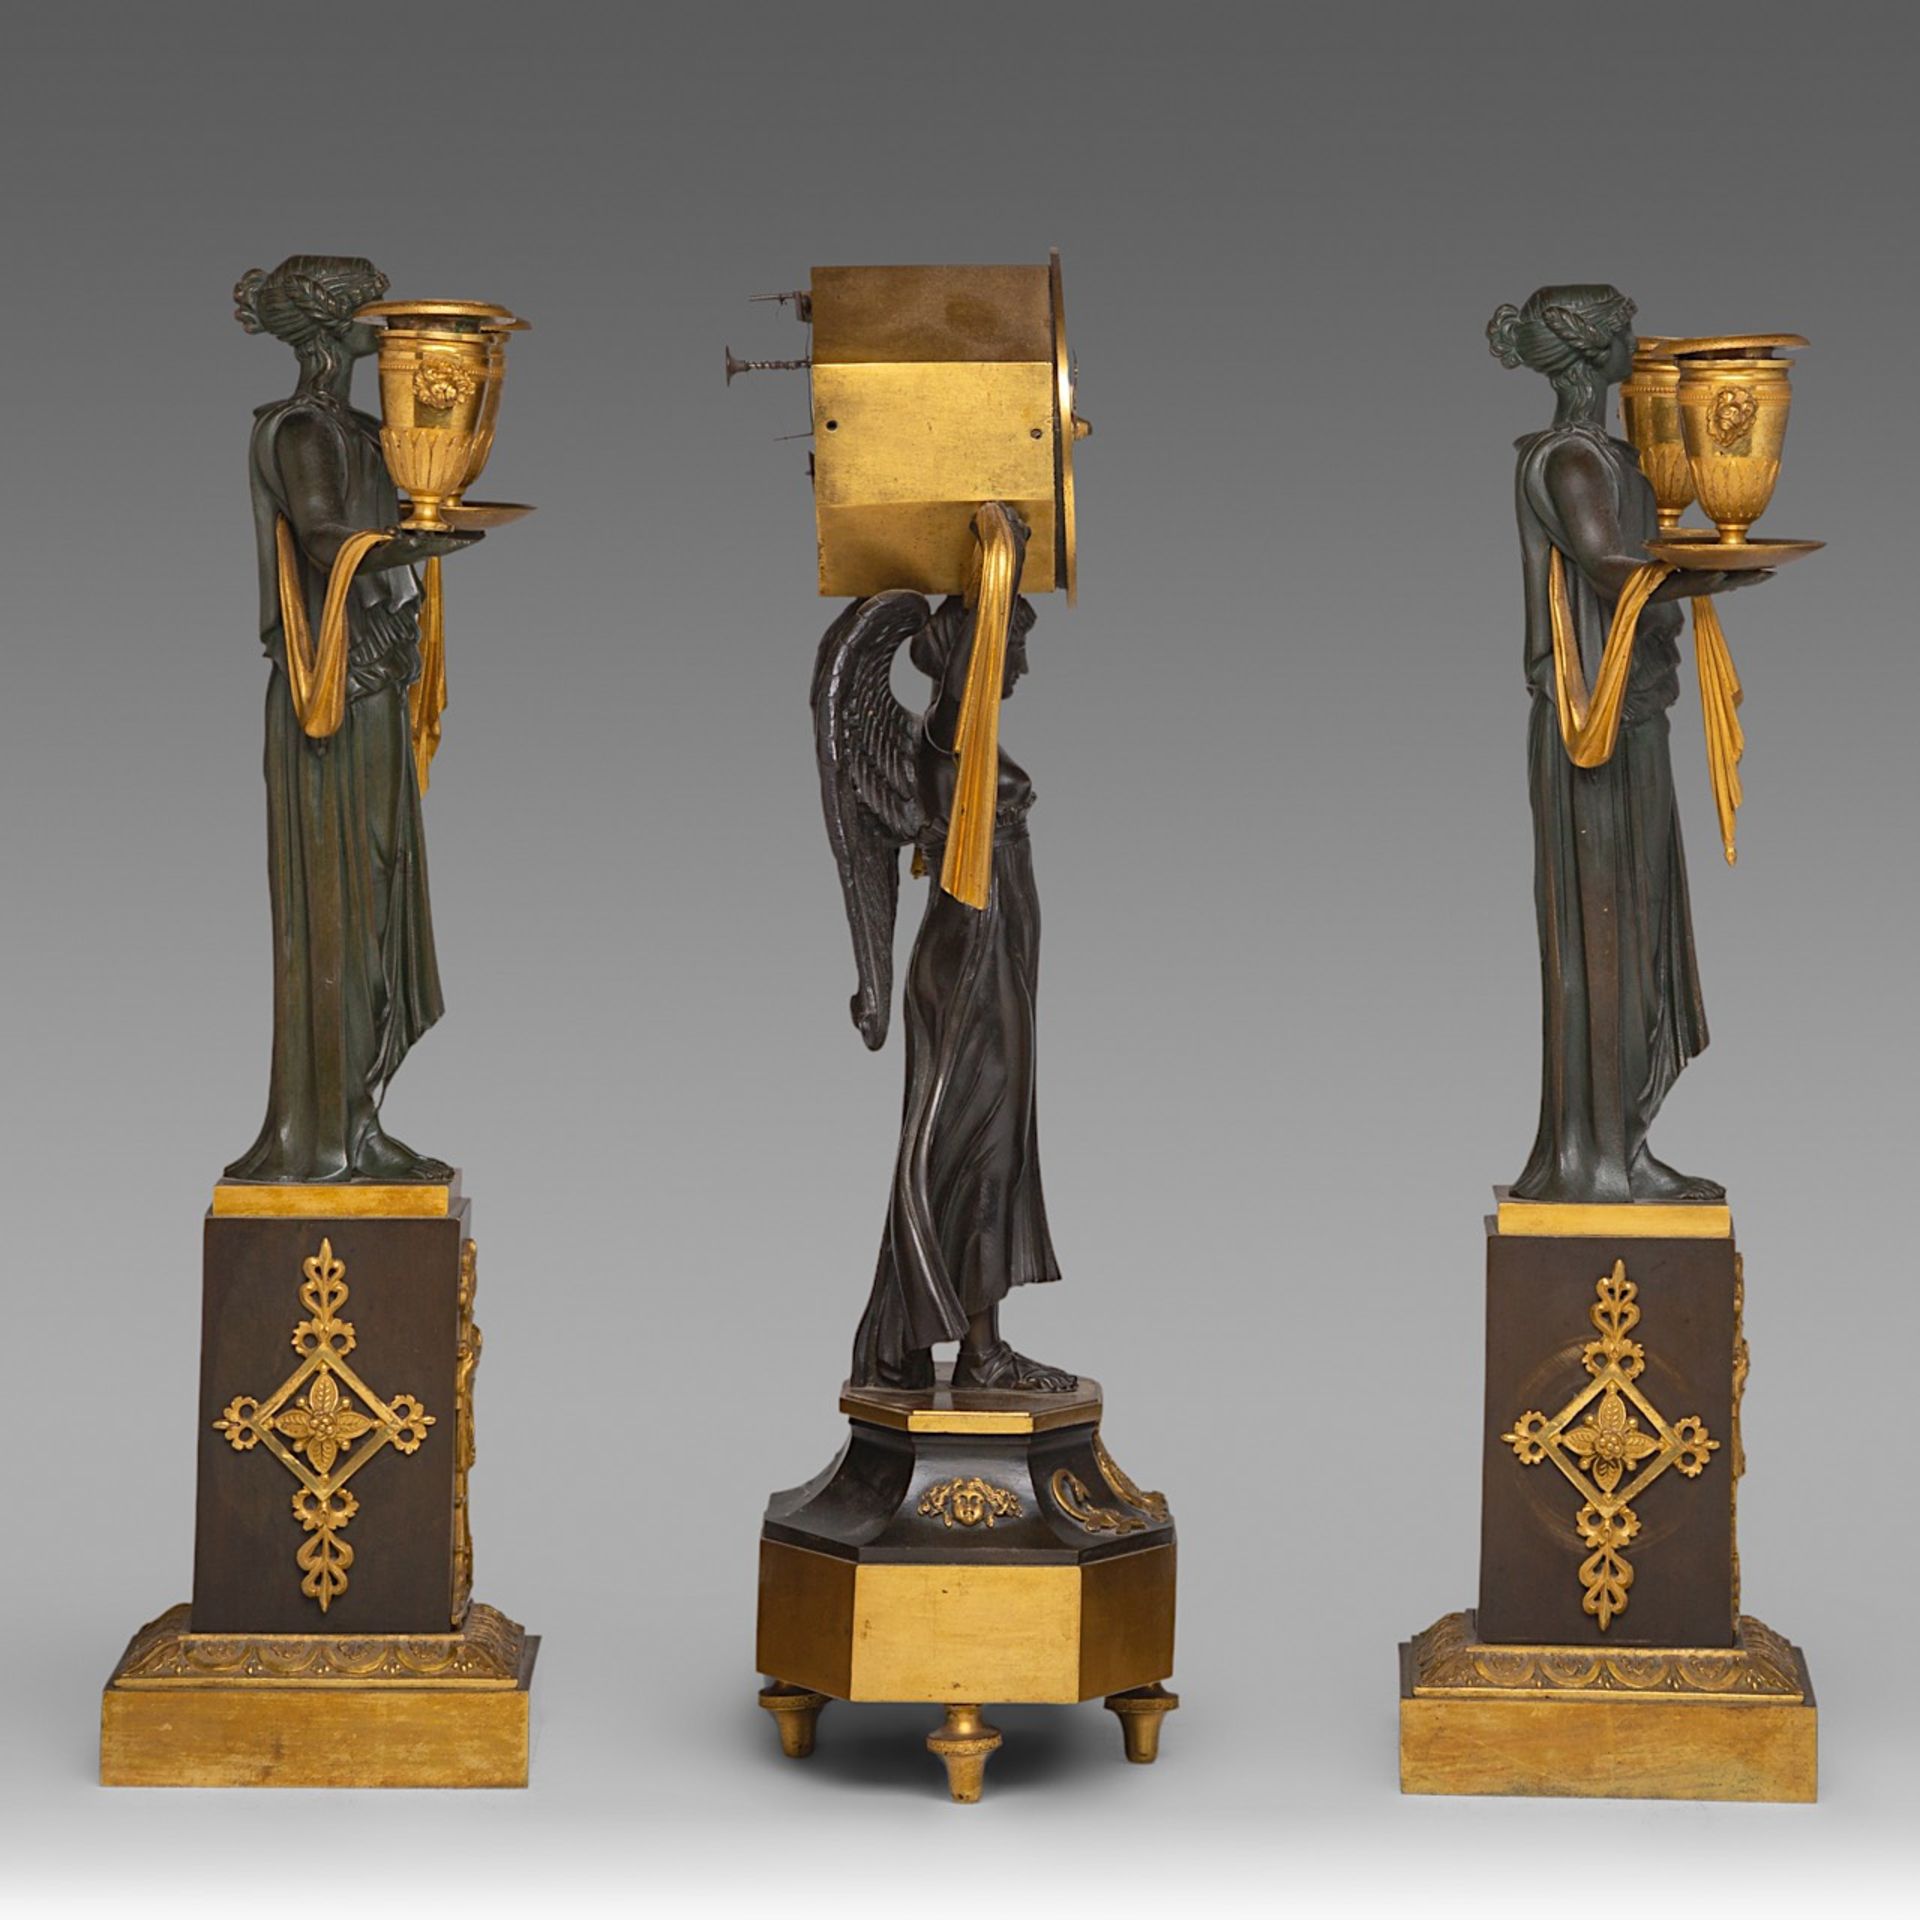 An Empire figural mantle clock, and two matching candelabras, H 43 - 44 cm - Image 4 of 6